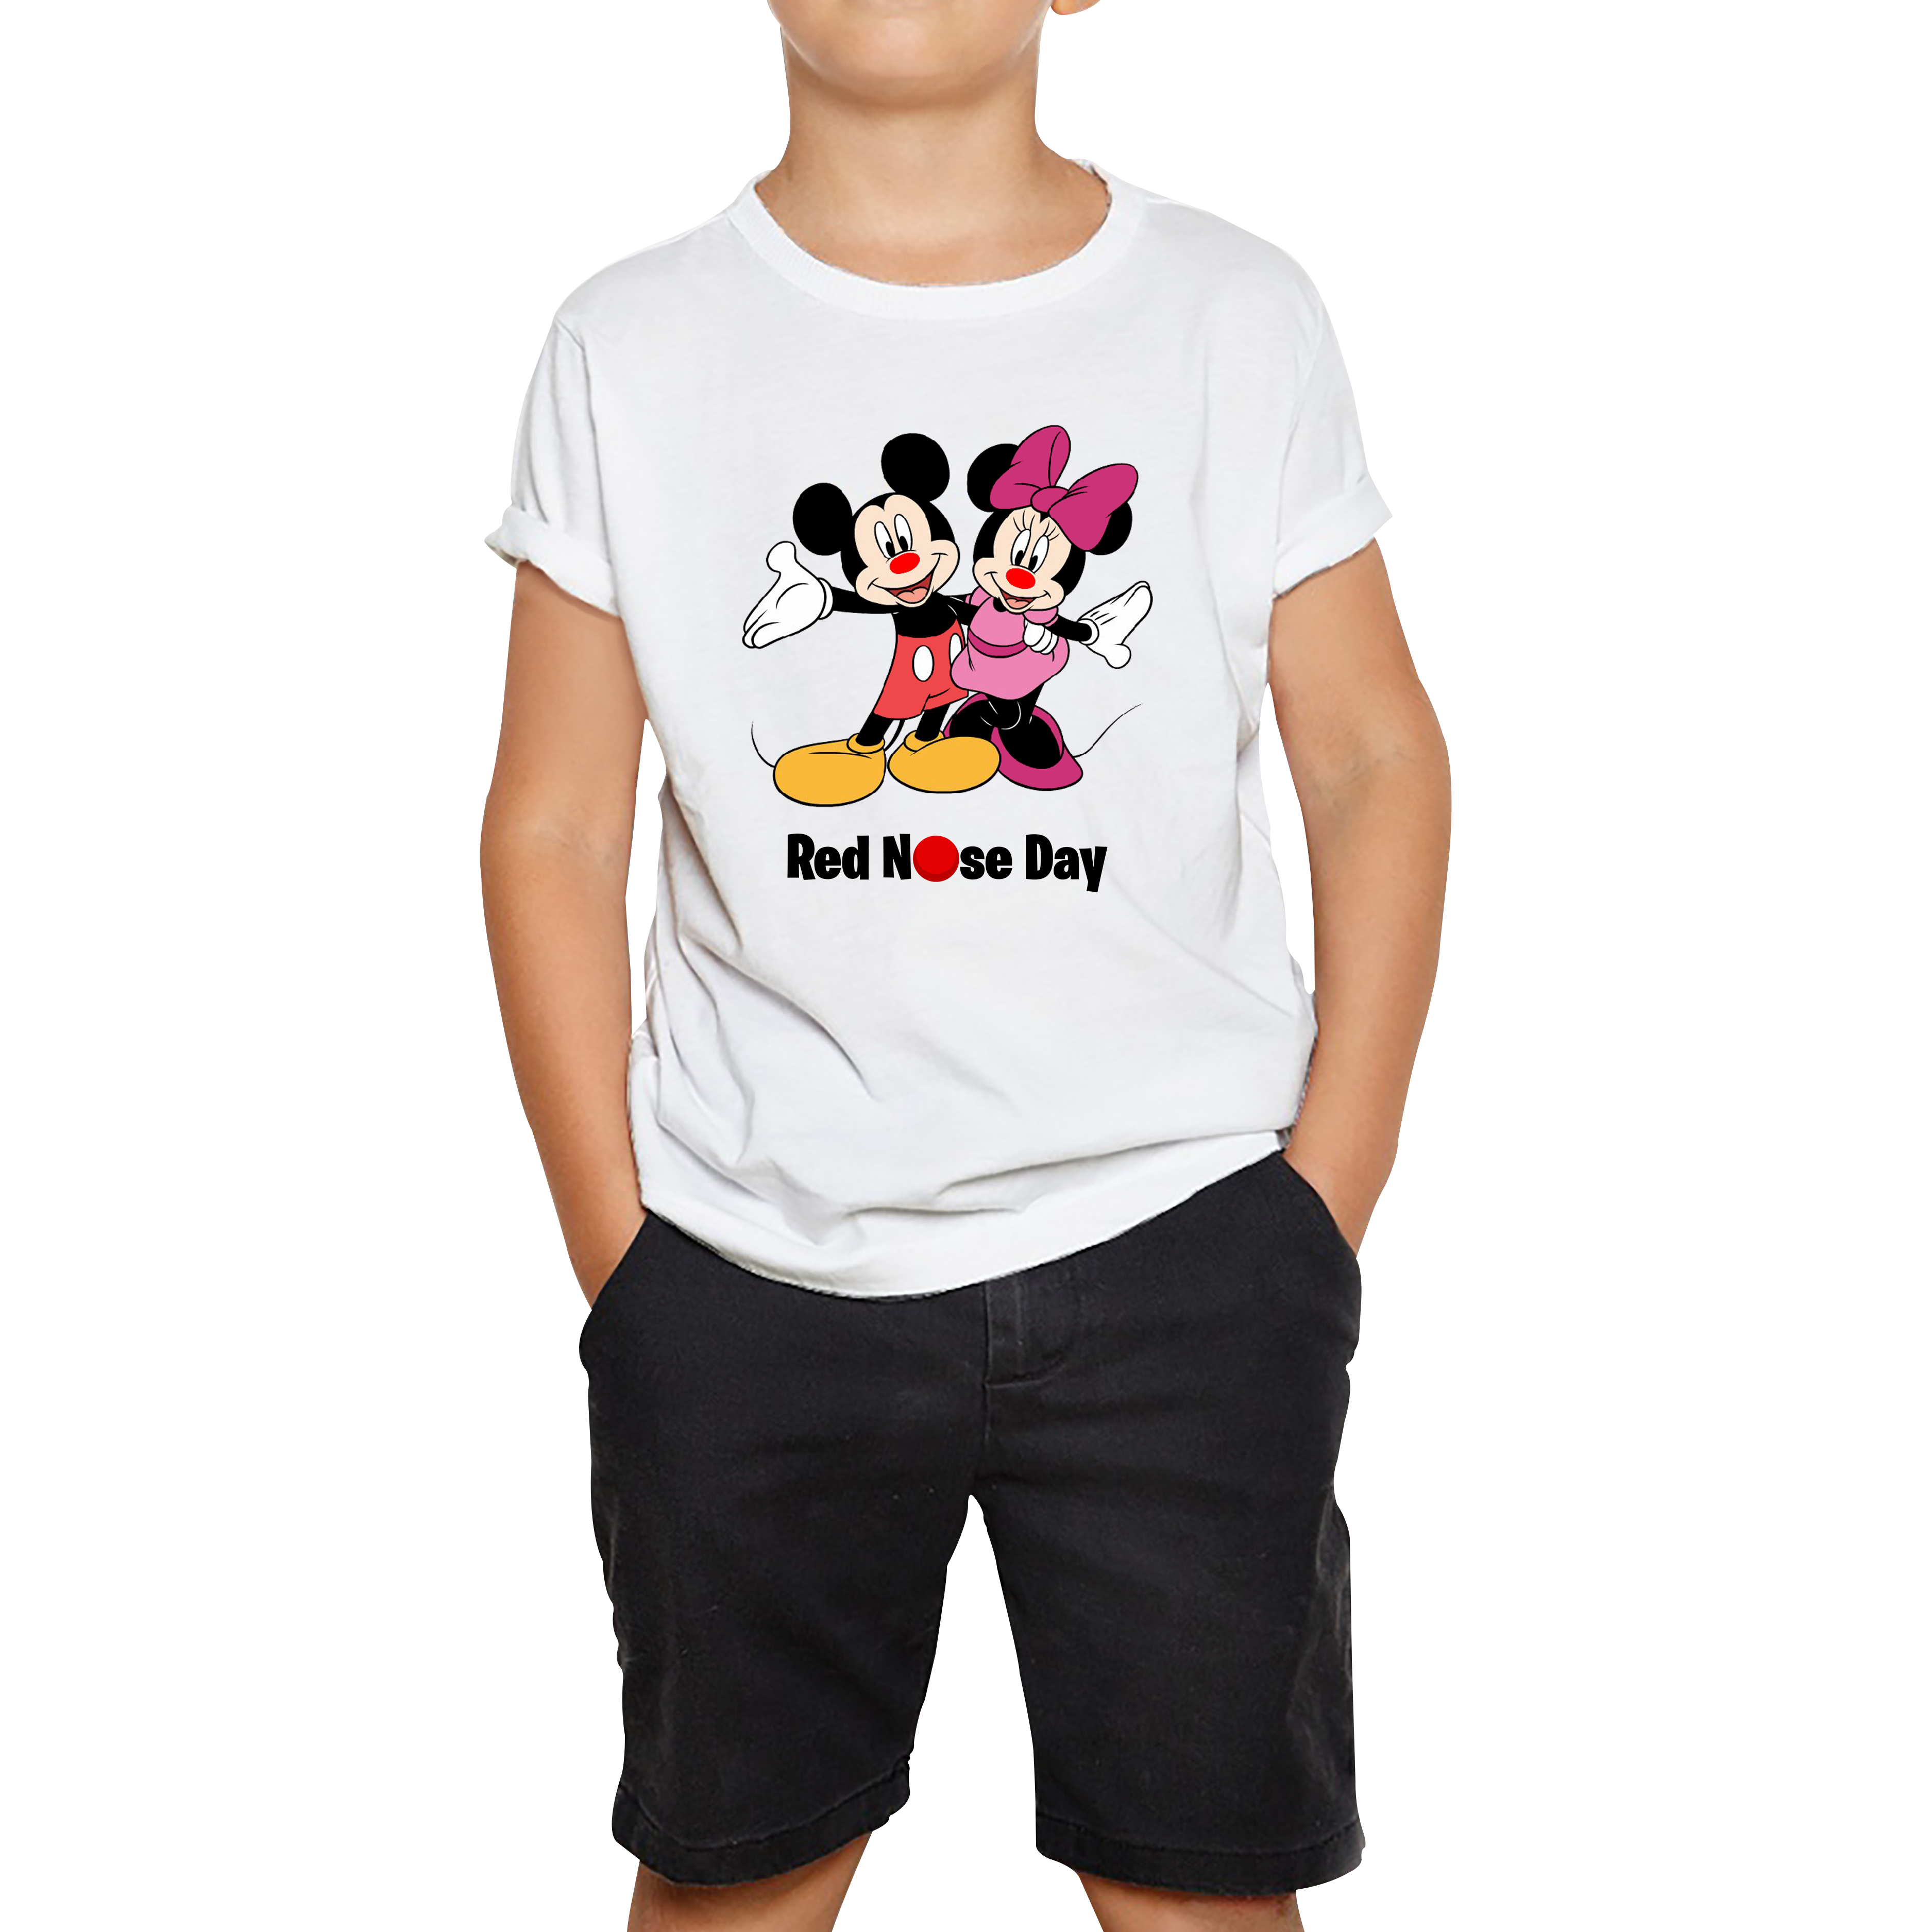 Mickey And Minnie Mouse Red Nose Day Kids T Shirt. 50% Goes To Charity